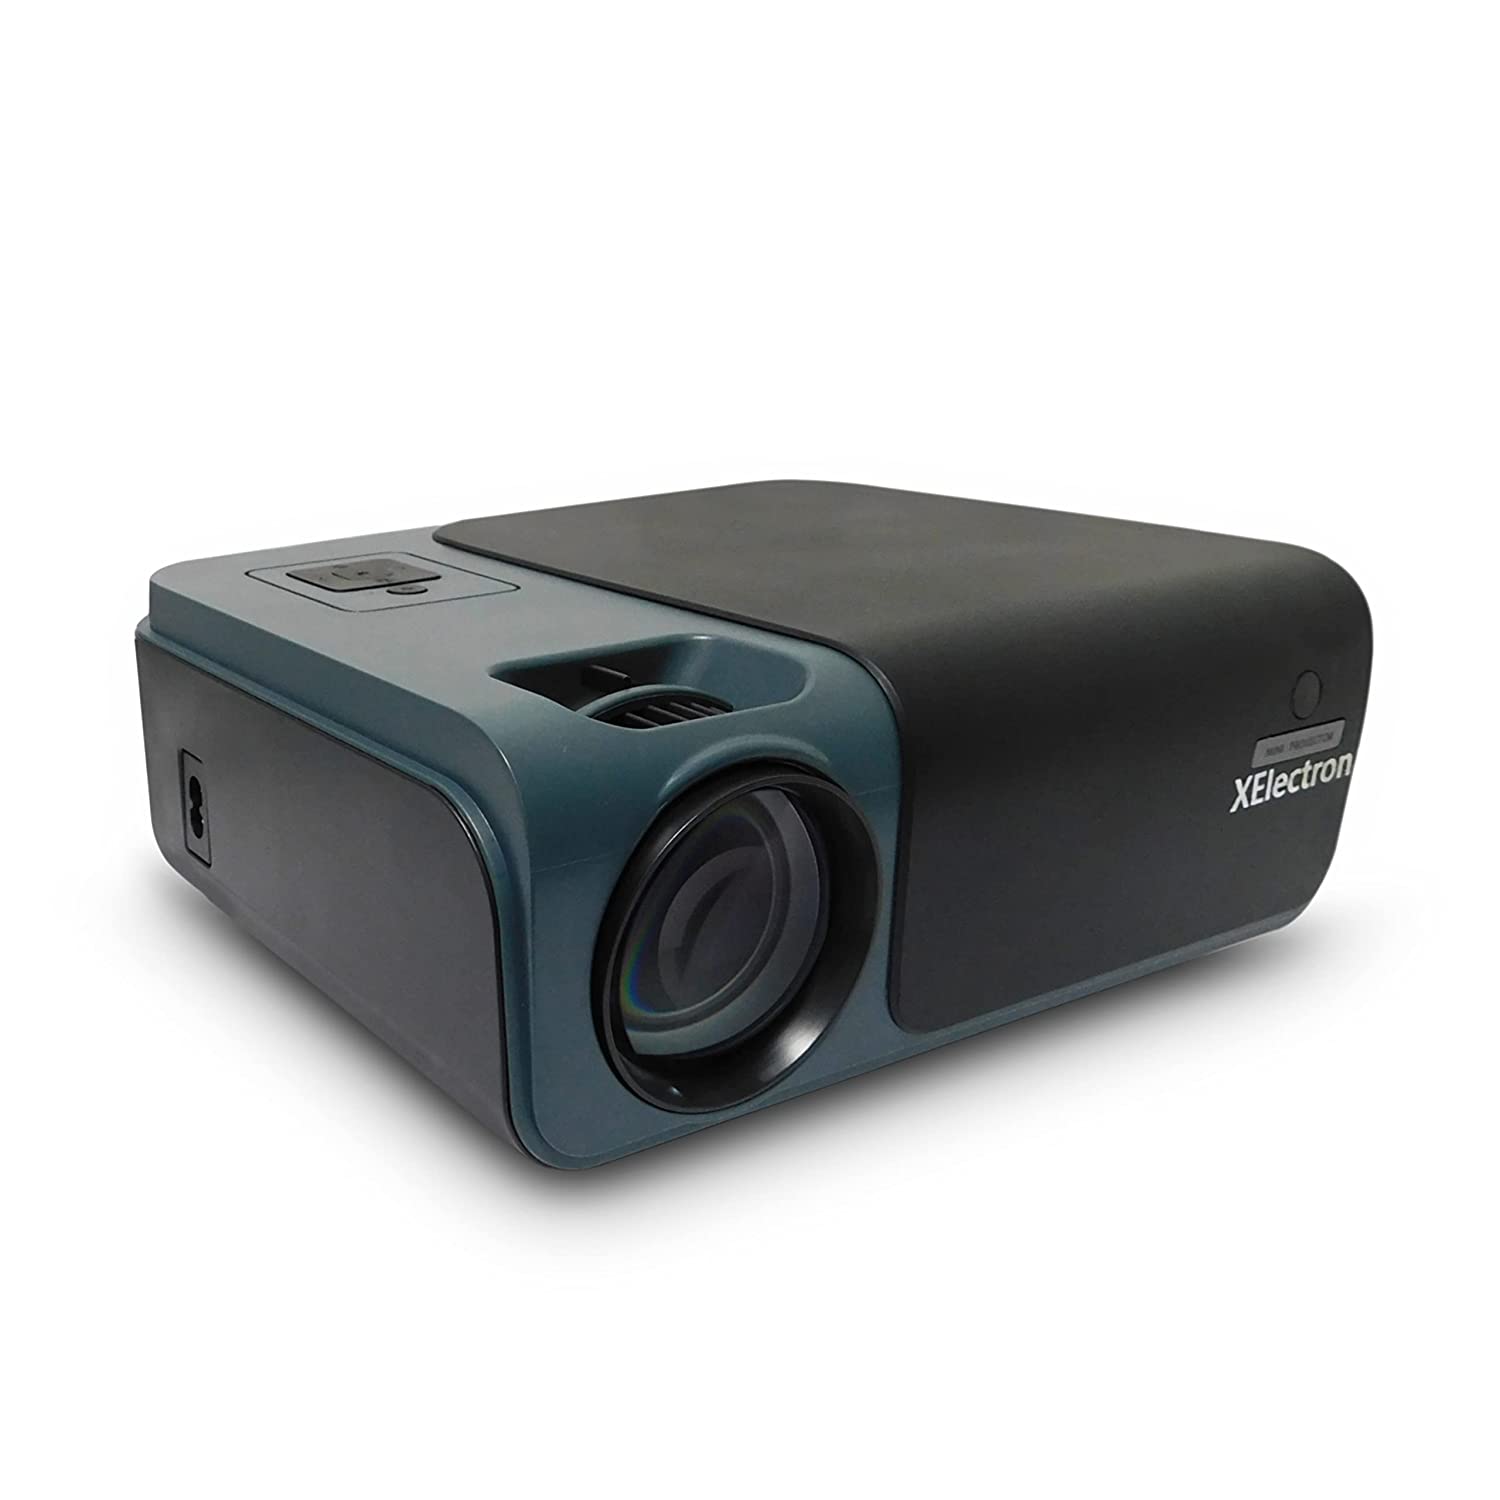 C50 WiFi Bluetooth Projector 7500 Lumens Real Full HD 1080P Resolution, 300 Display 4K Support - XElectron